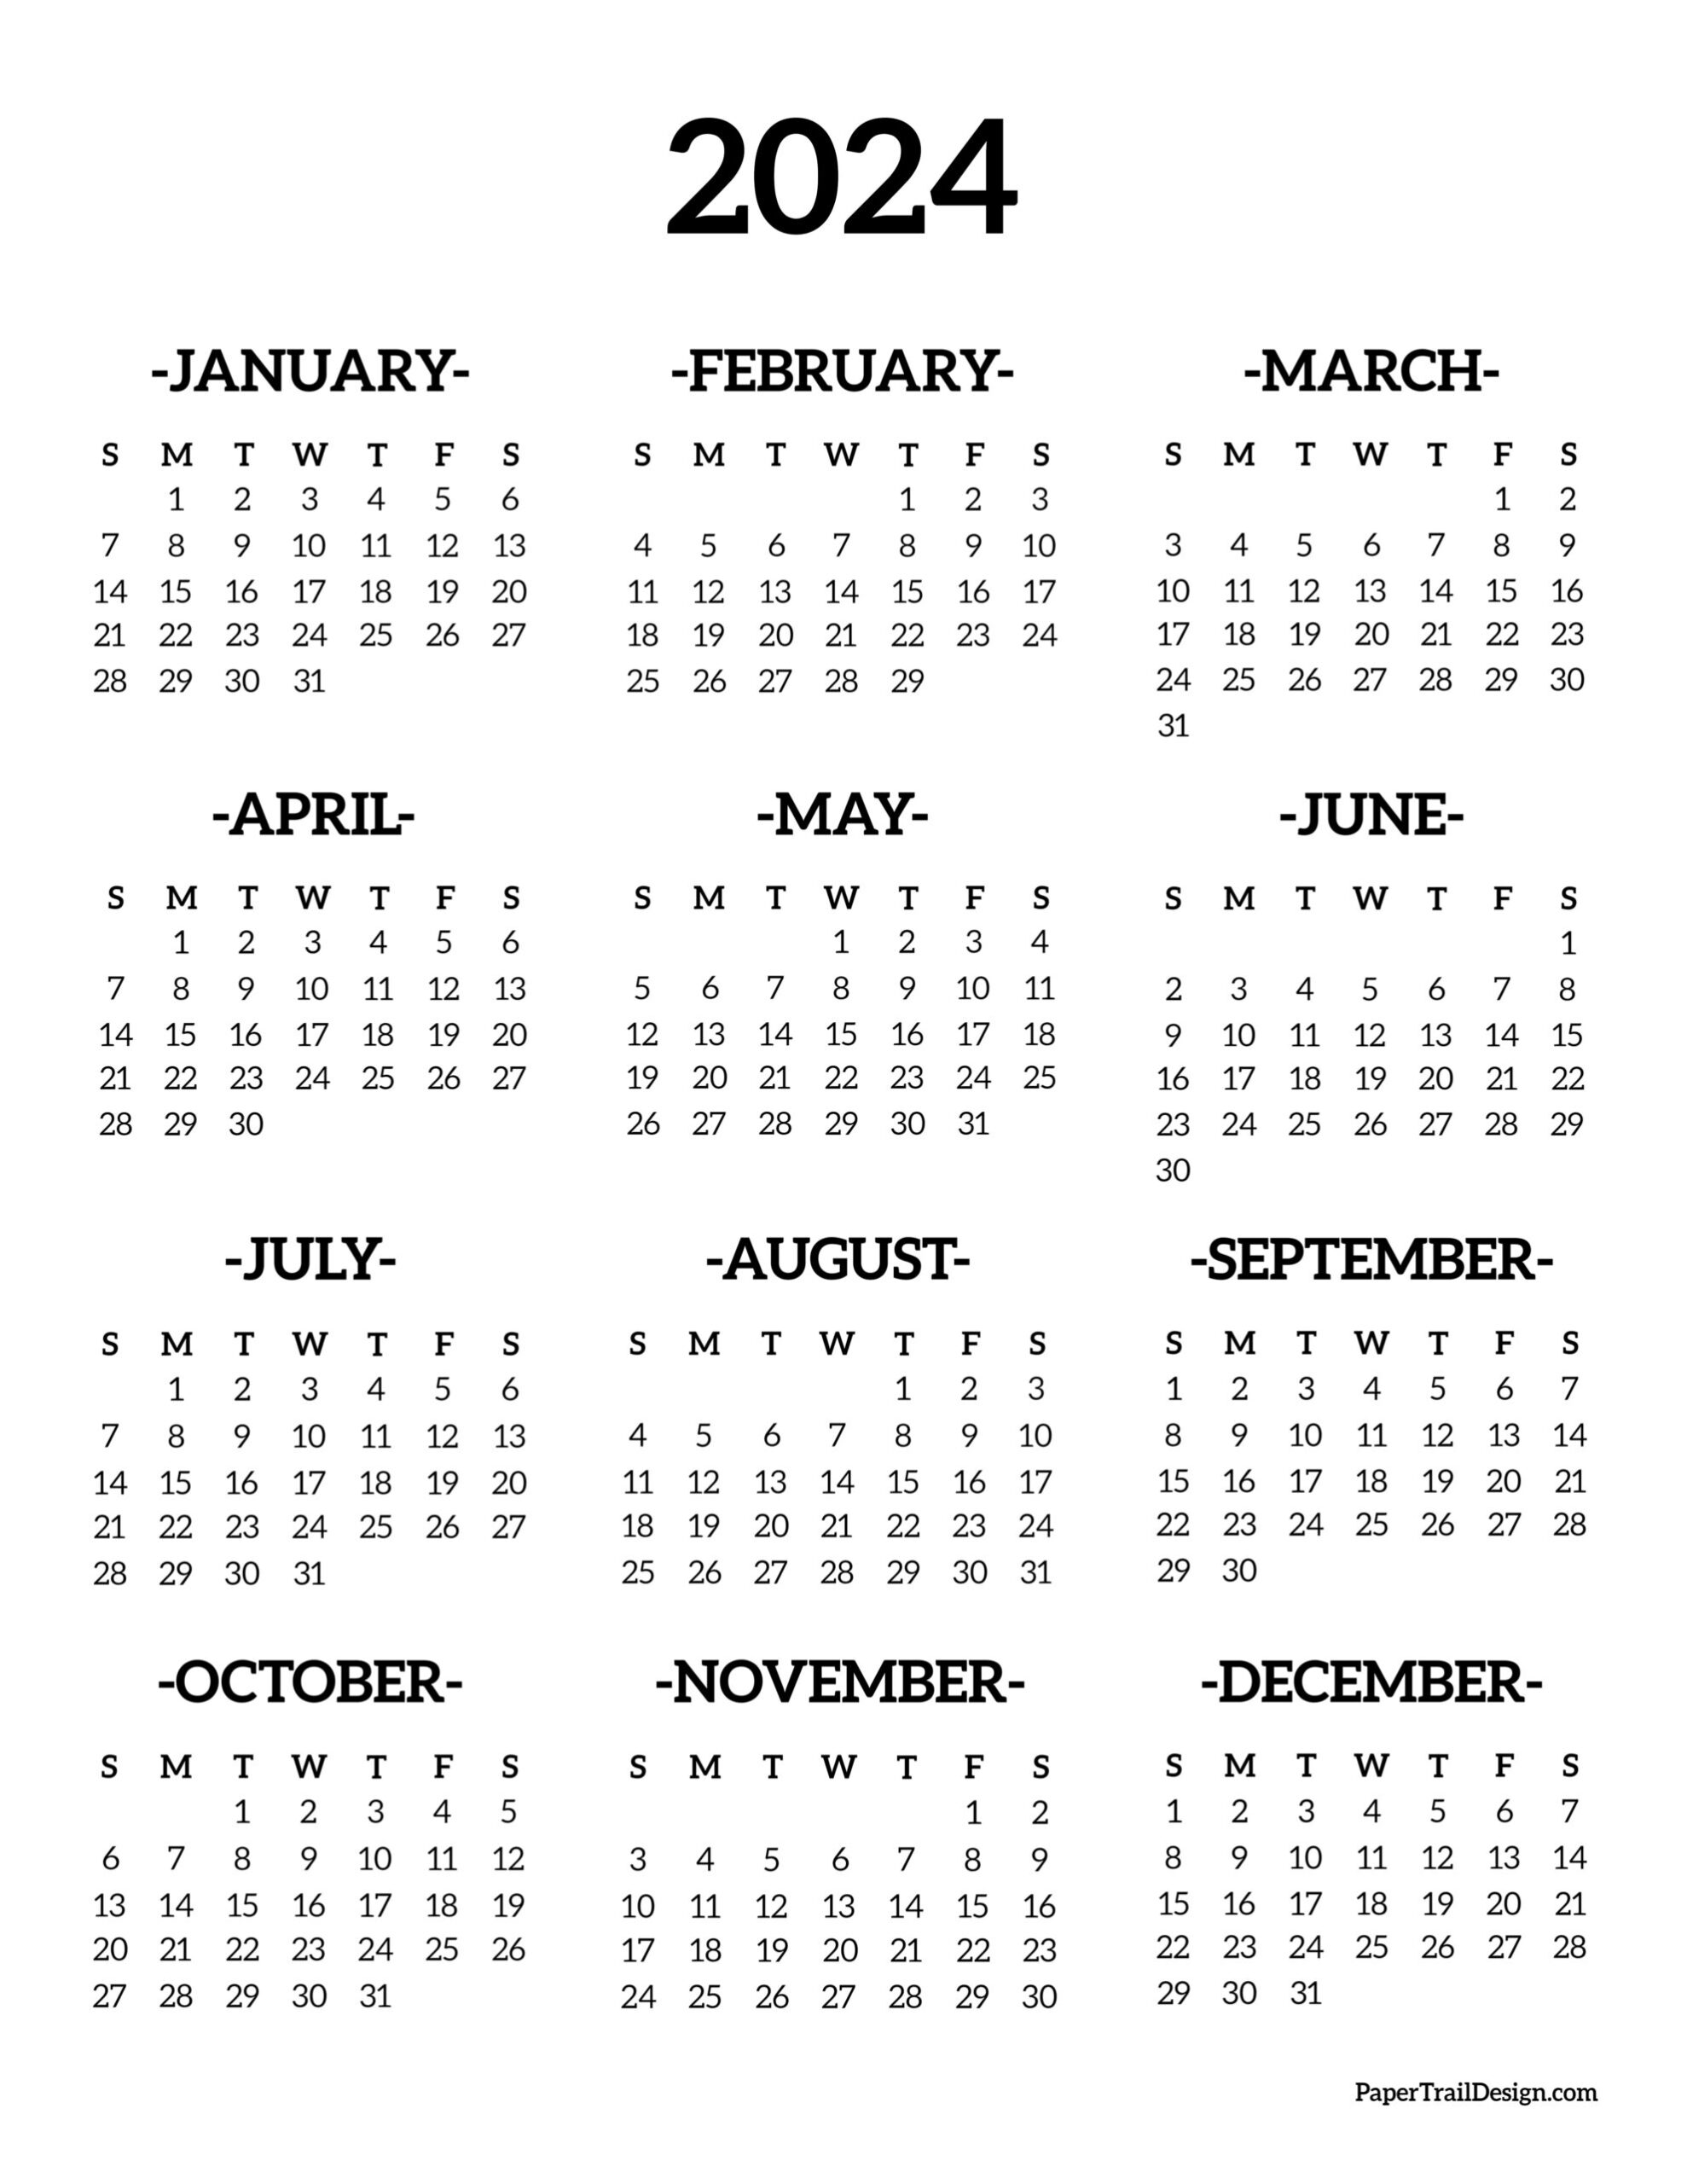 Calendar 2024 Printable One Page - Paper Trail Design for Single Page 2024 Calendar Printable